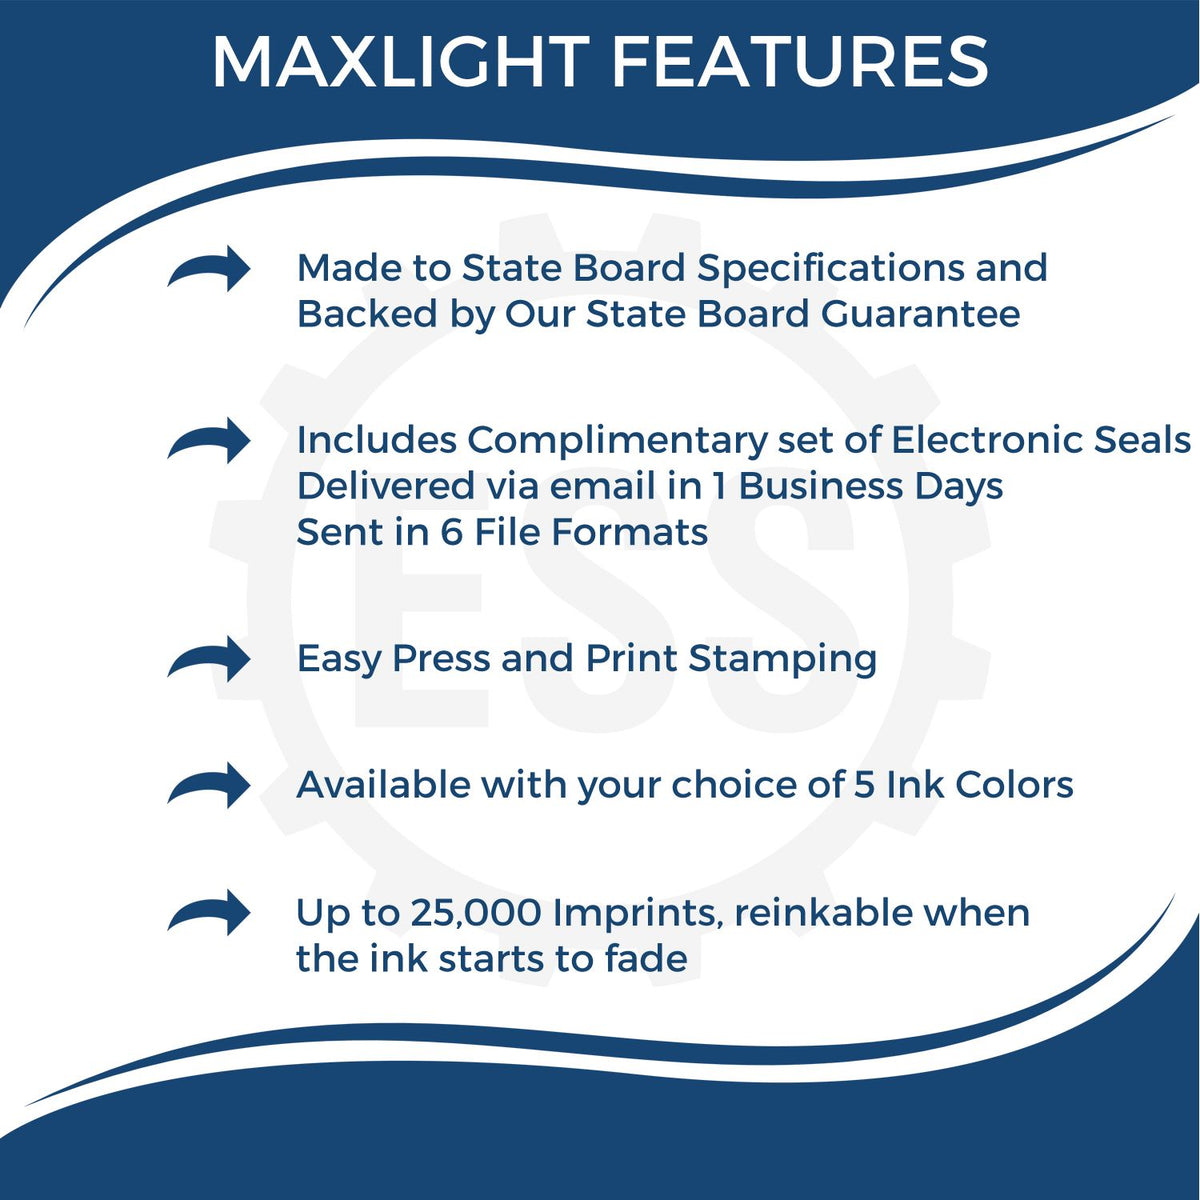 A picture of an infographic highlighting the selling points for the MaxLight Premium Pre-Inked Montana State Seal Notarial Stamp